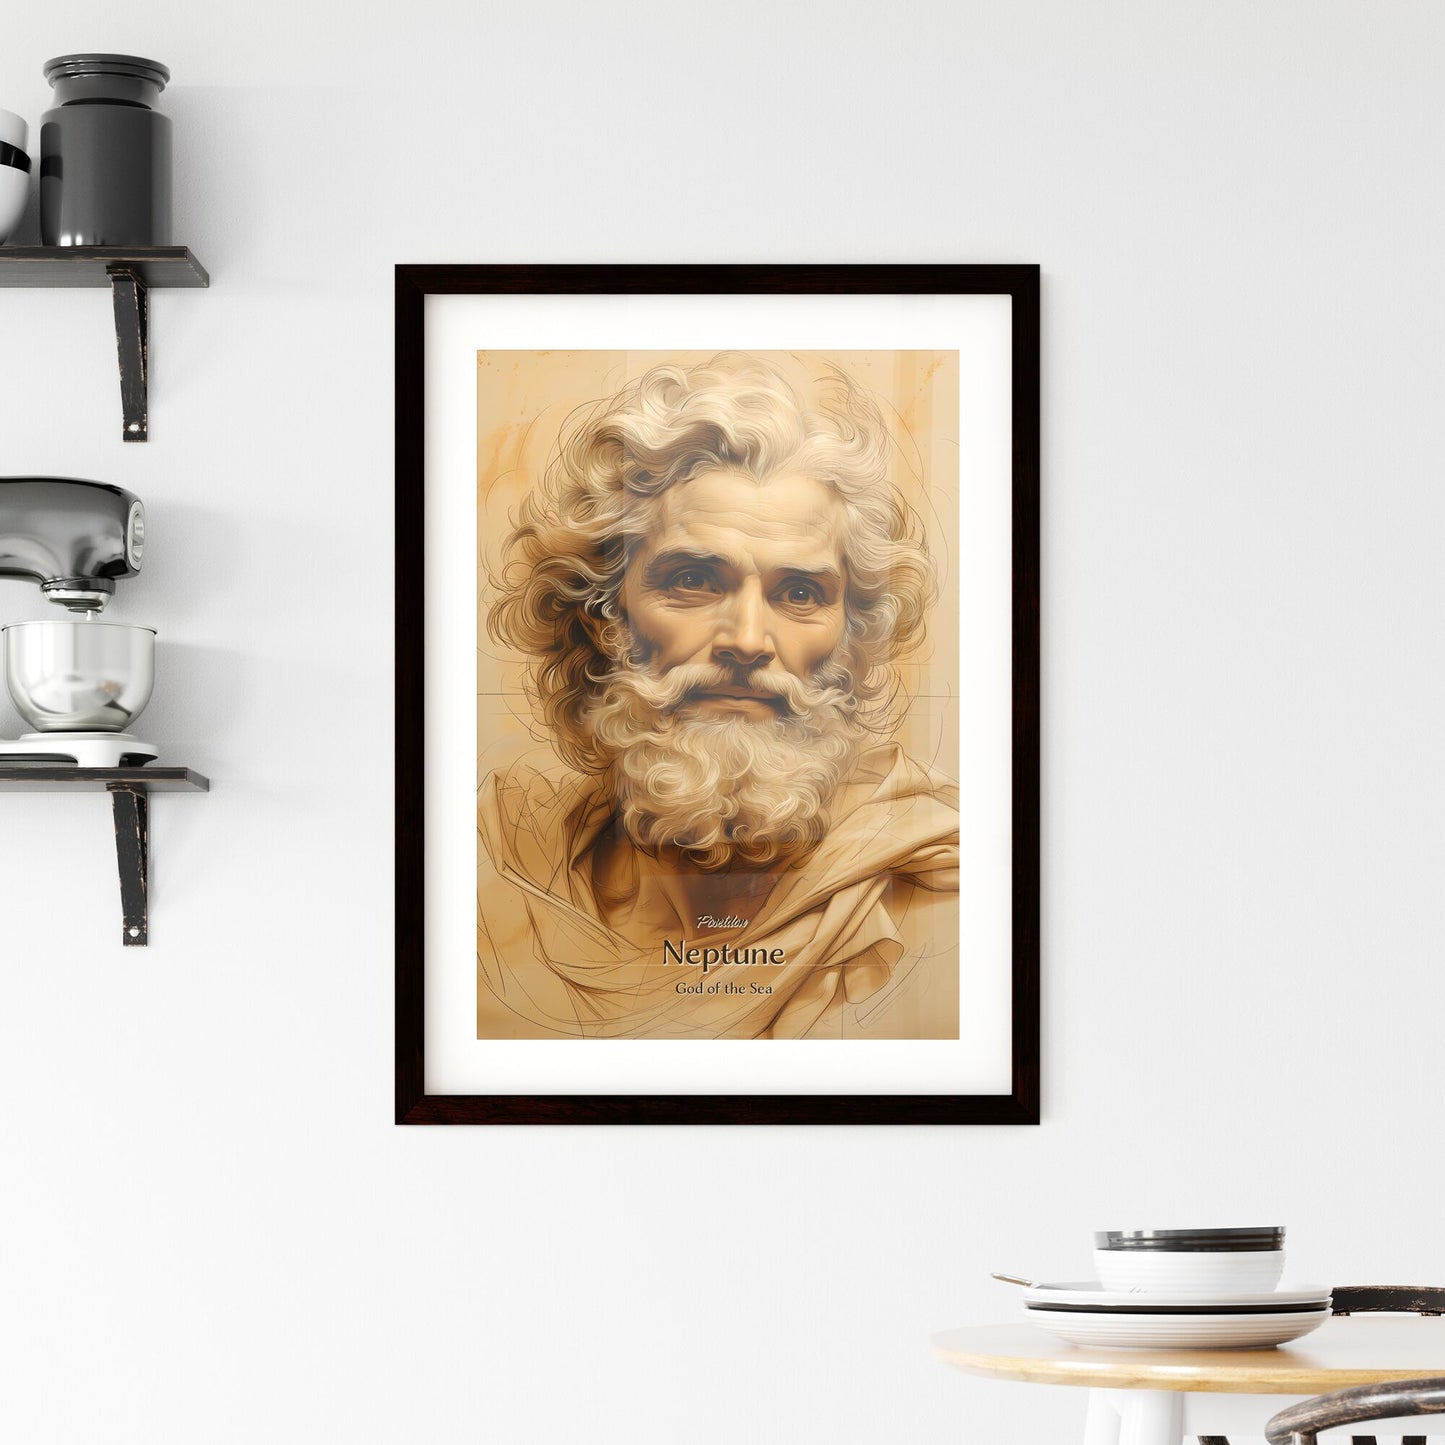 Poseidon, Neptune, God of the Sea, A Poster of a drawing of a man with a beard Default Title